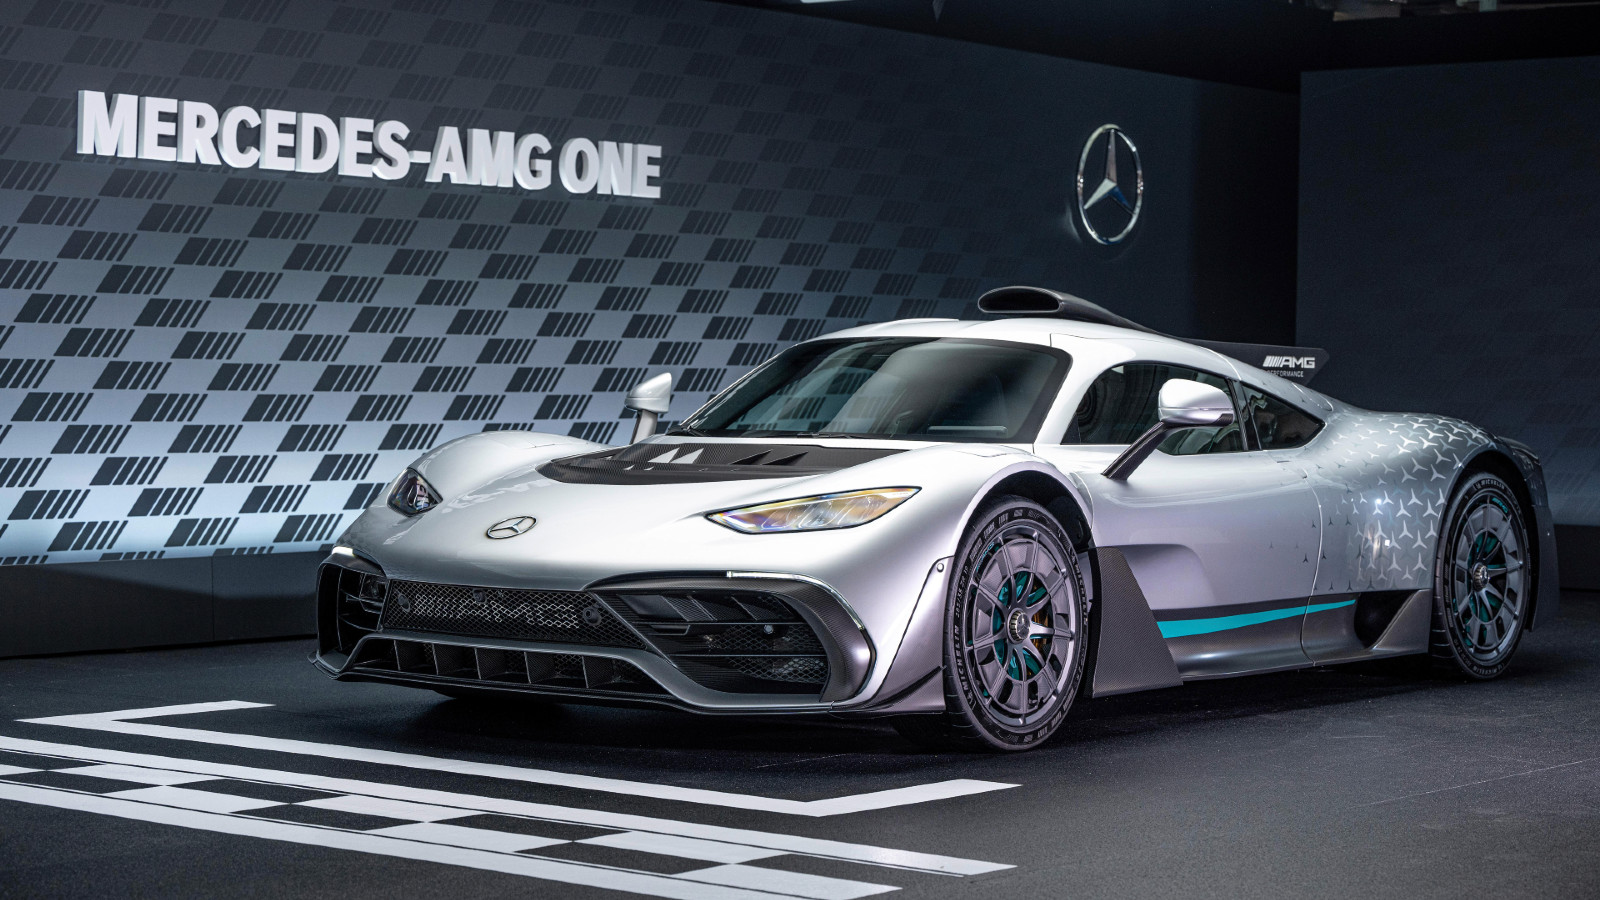 Mercedes AMG ONE revealed by Daimler. June 2022.